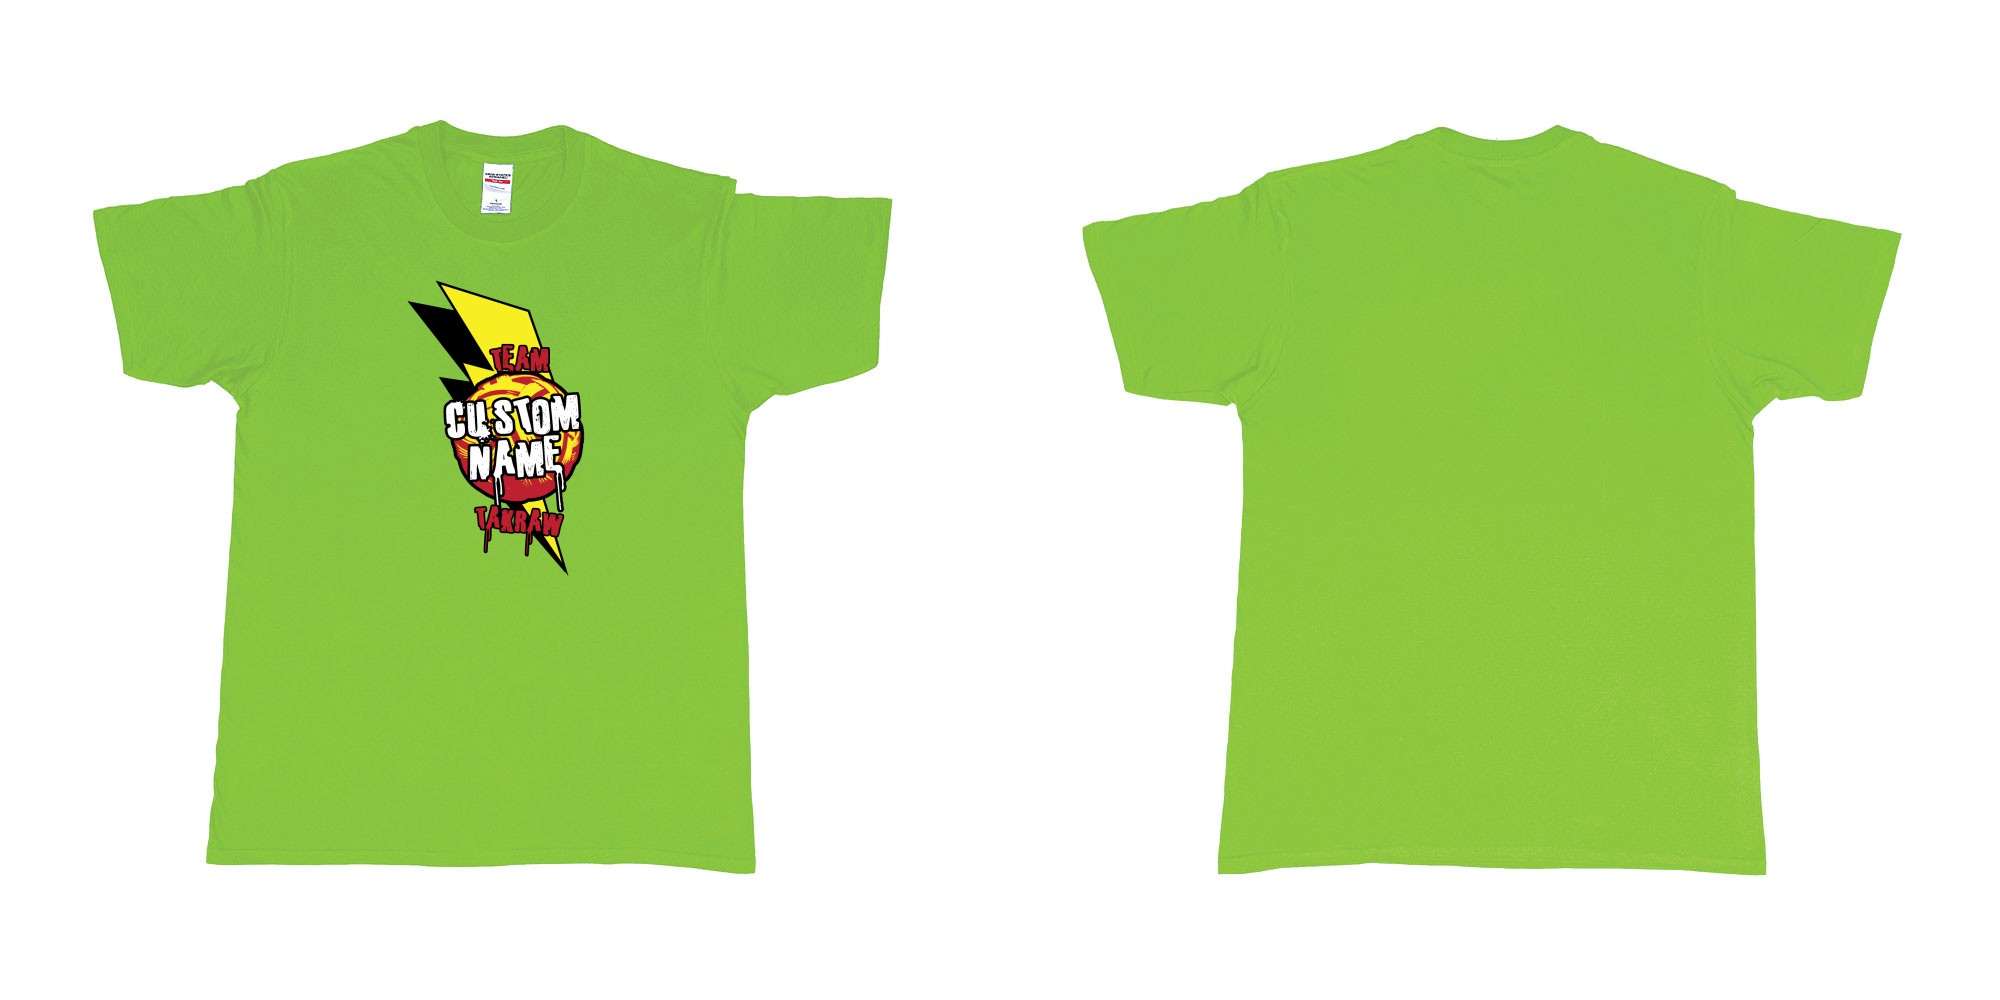 Custom tshirt design takraw custom team name design in fabric color lime choice your own text made in Bali by The Pirate Way